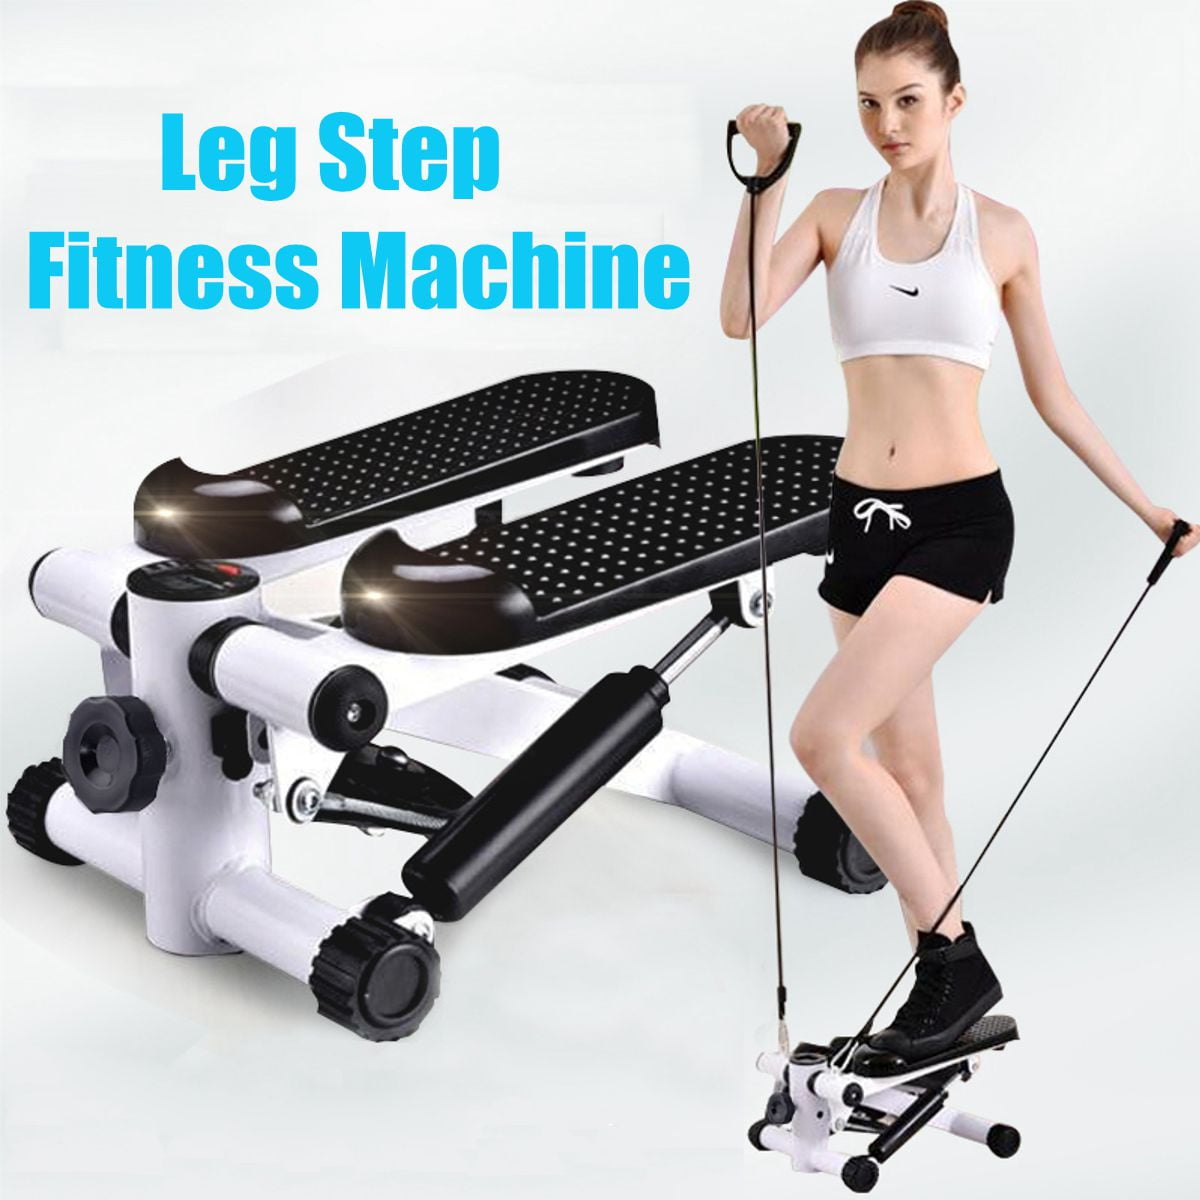 Jinjin Fitness Stair Stepper for Women and Man Indoor Exercise Bike Aerobic Fitness Stepper Air Stair Climber Stepper Exercise,Mini Stepper Fitness Cardio Exercise Trainer 